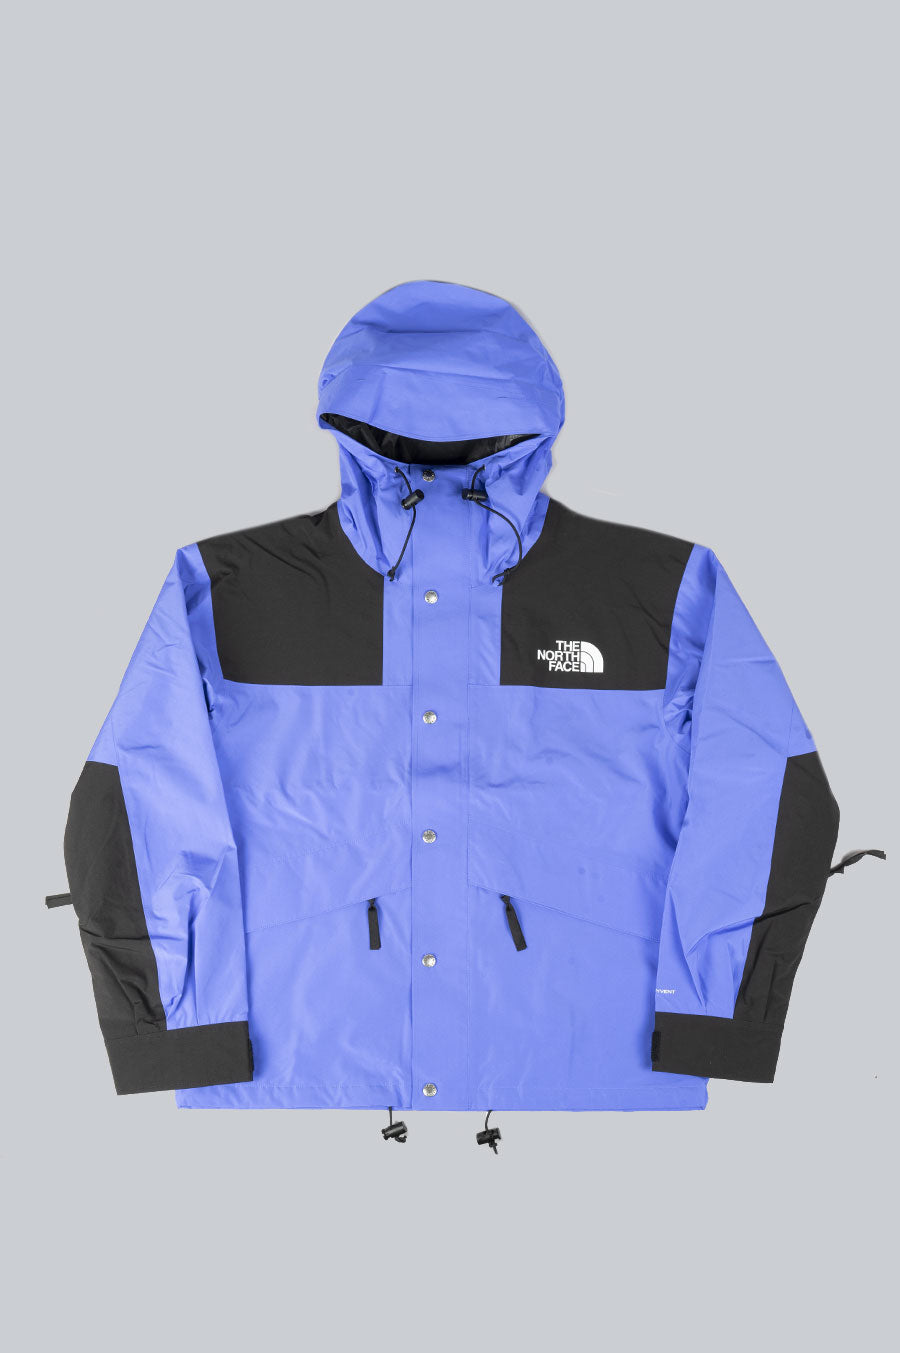 THE NORTH FACE – BLENDS